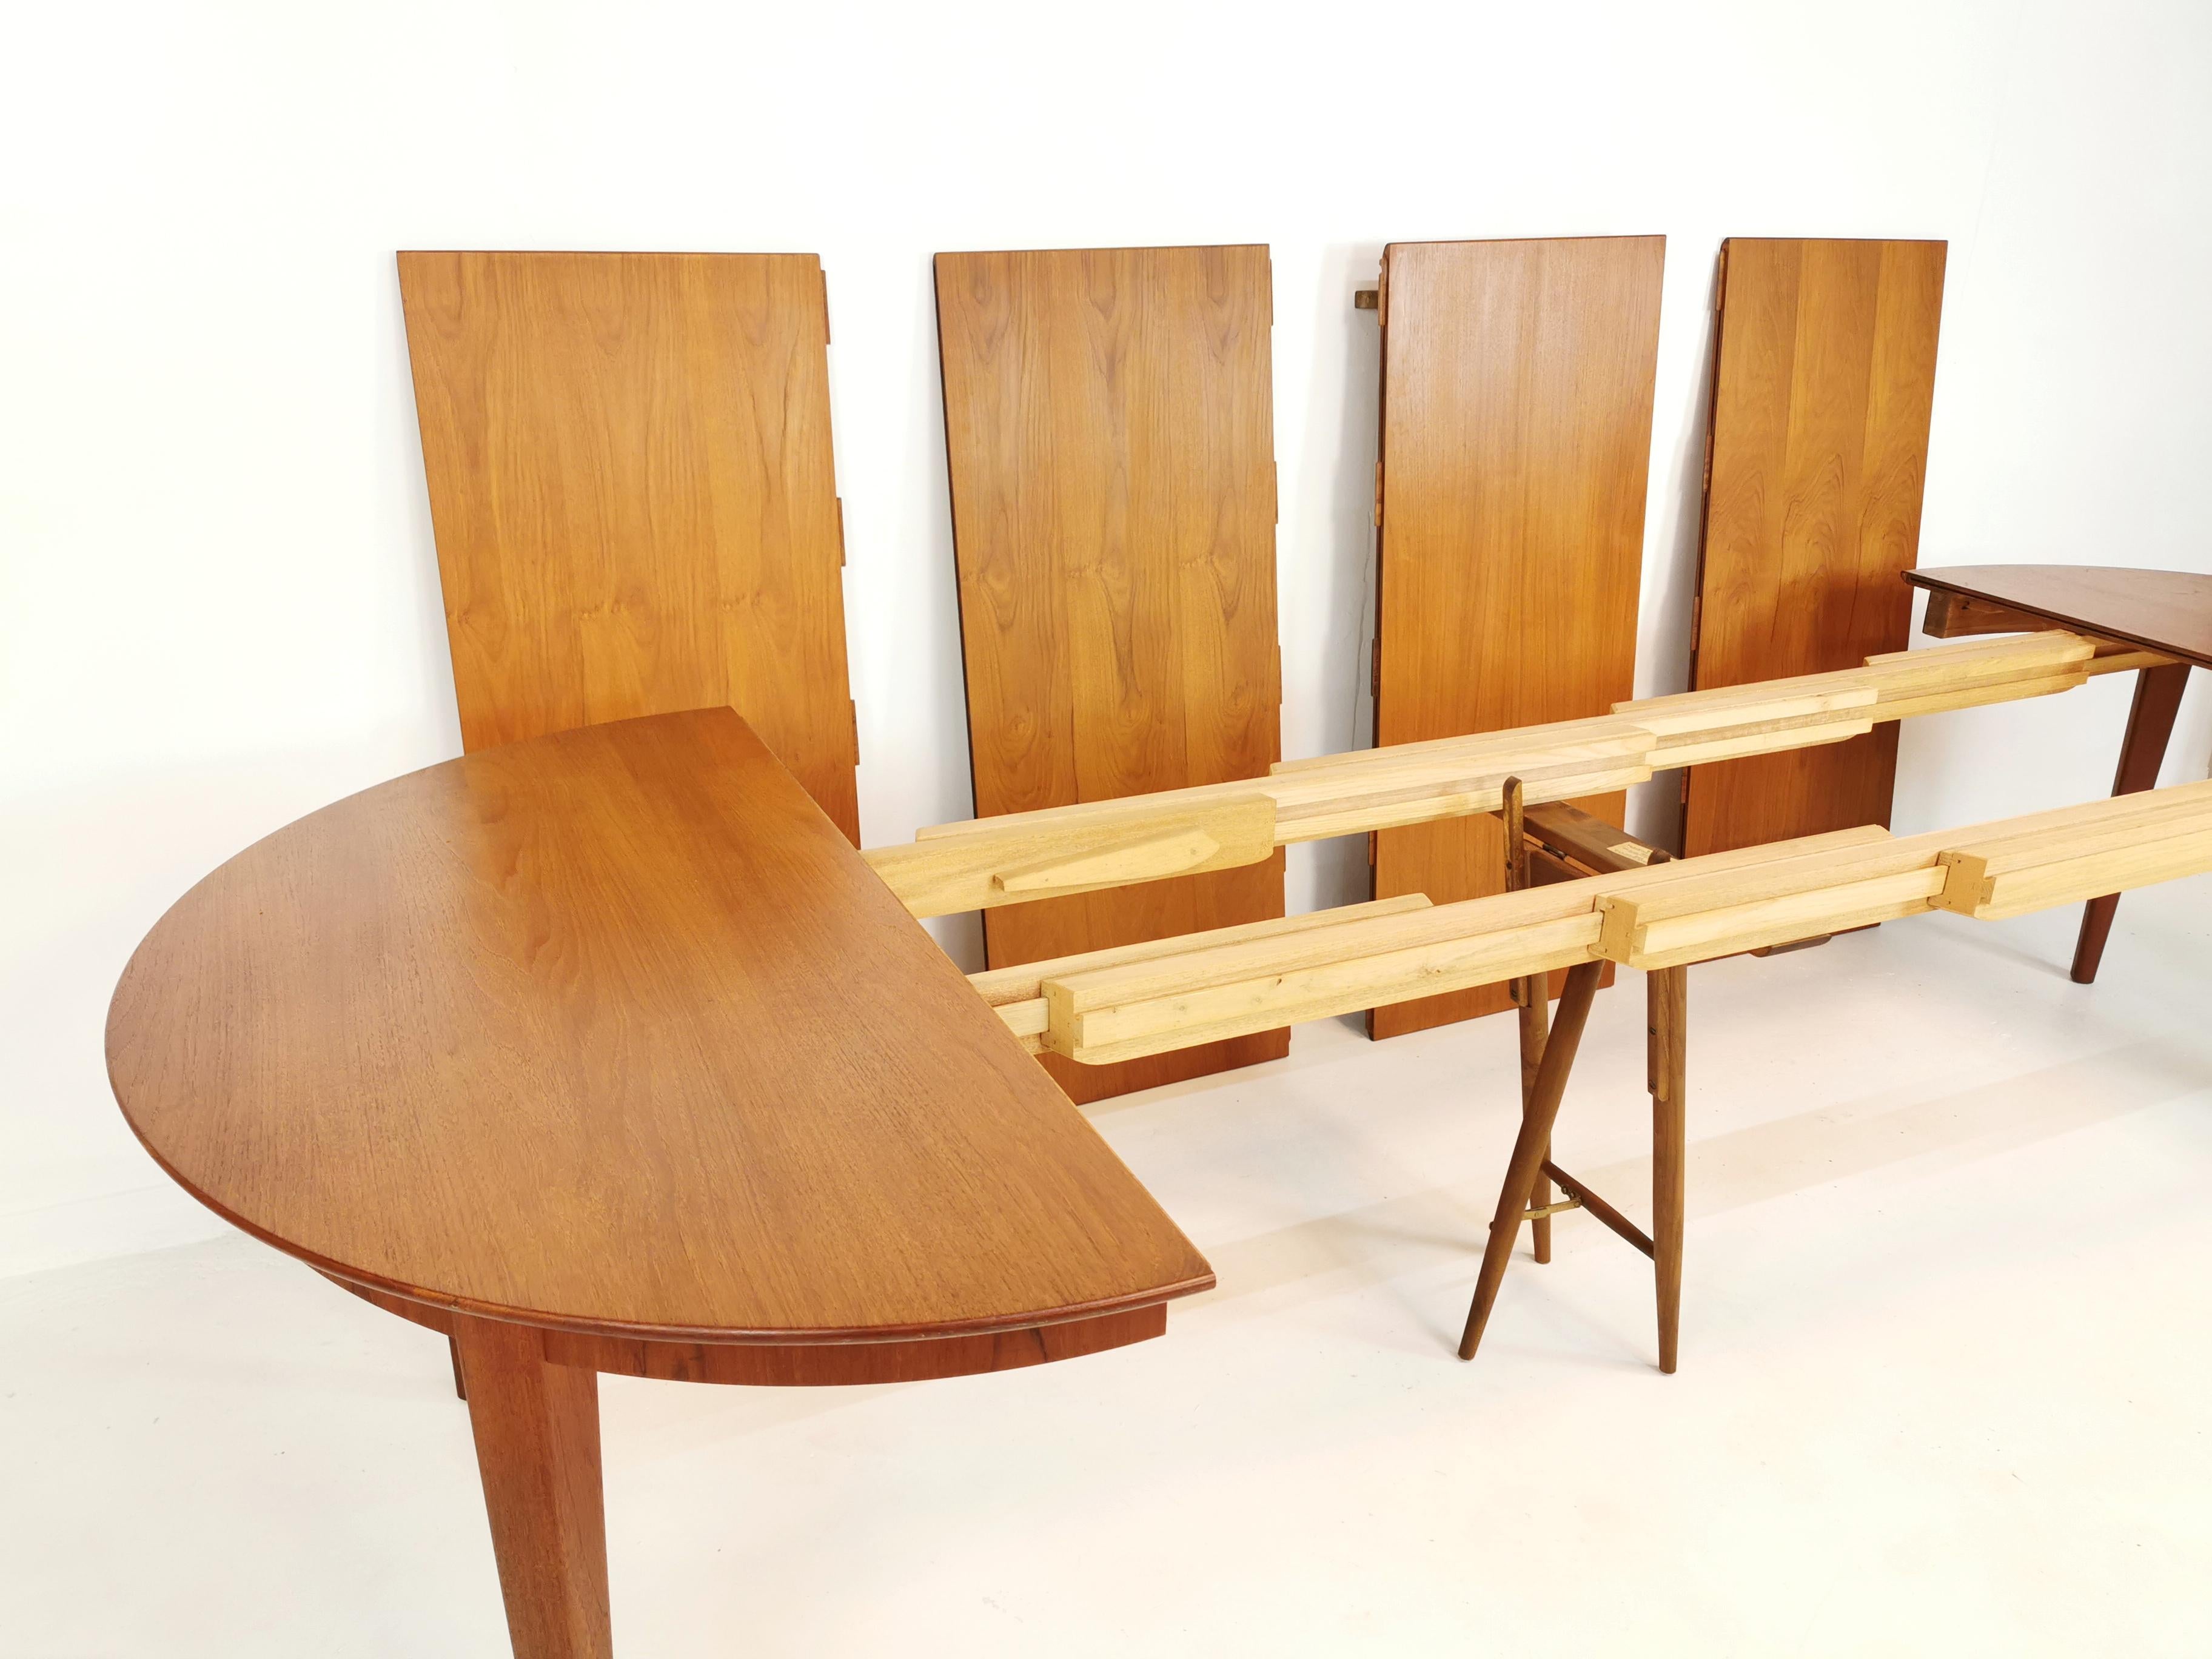 Oval danish dining table by Henning Kjaernulf. 

Designed by Henning Kjærnulf and manufactured in Denmark by Sorø Stolefabrik. 1960s.

It is made from solid teak with a matched veneer. 

4 separate leaves extend the table to seat 10-12 people